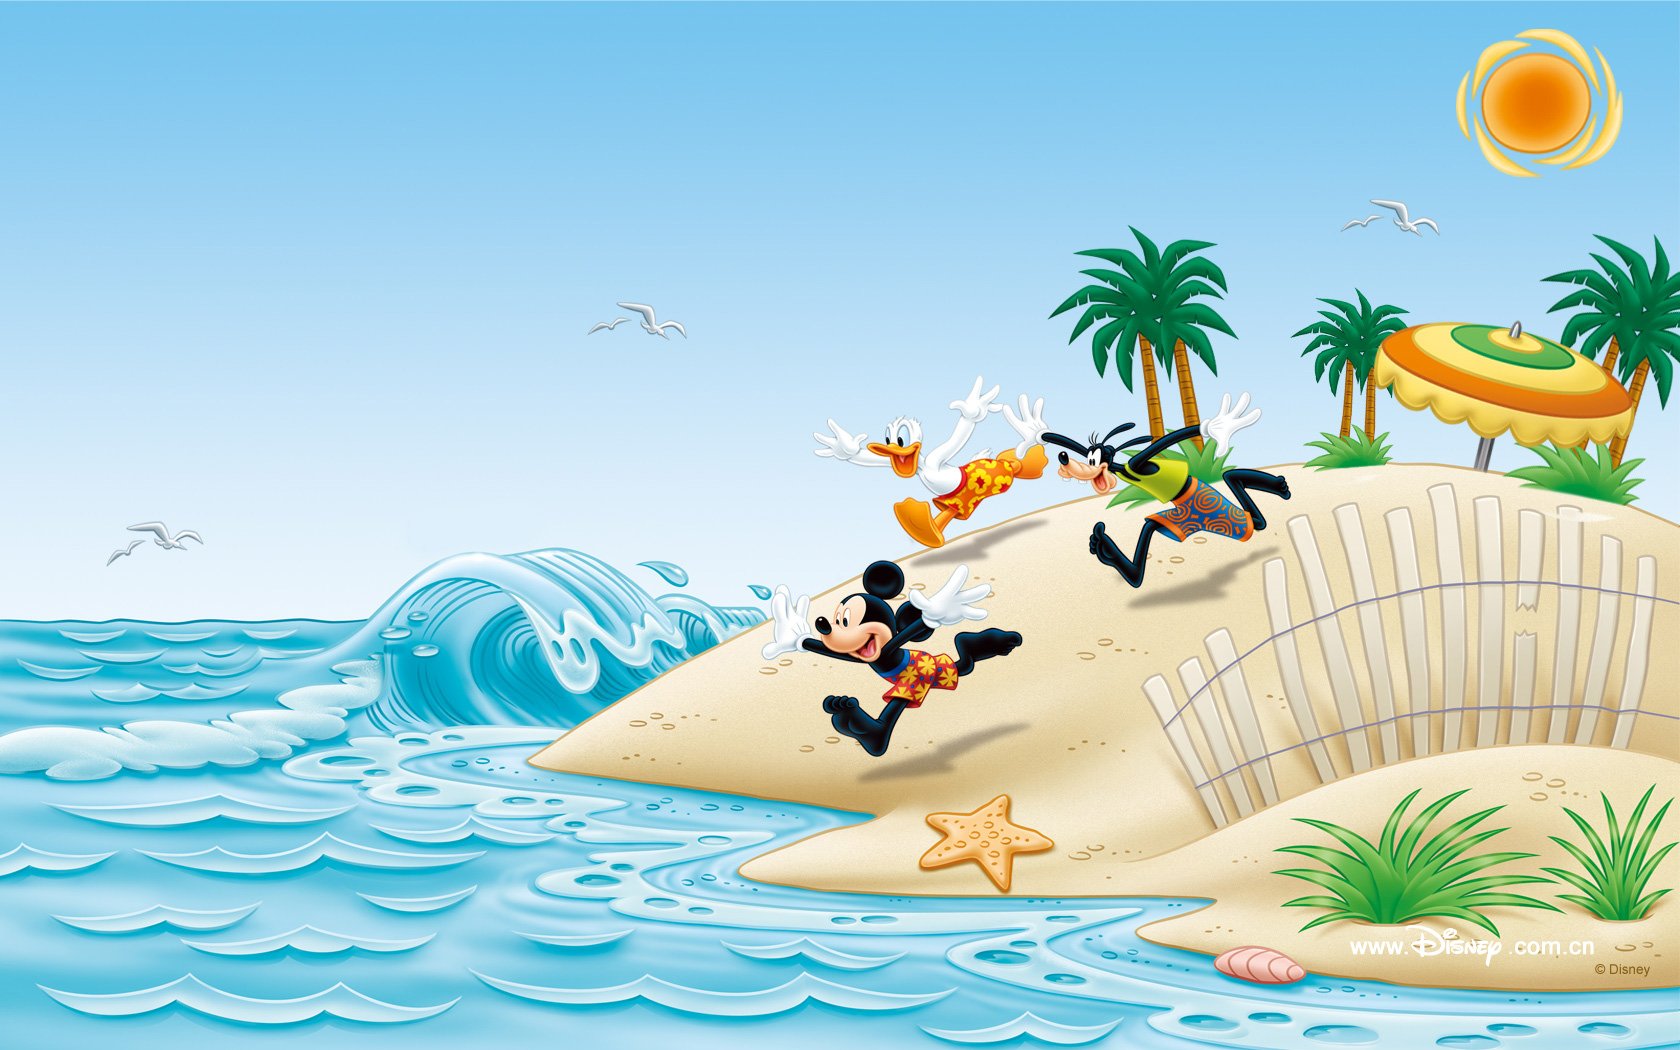 20+] Mickey Mouse On The Beach Wallpapers - WallpaperSafari